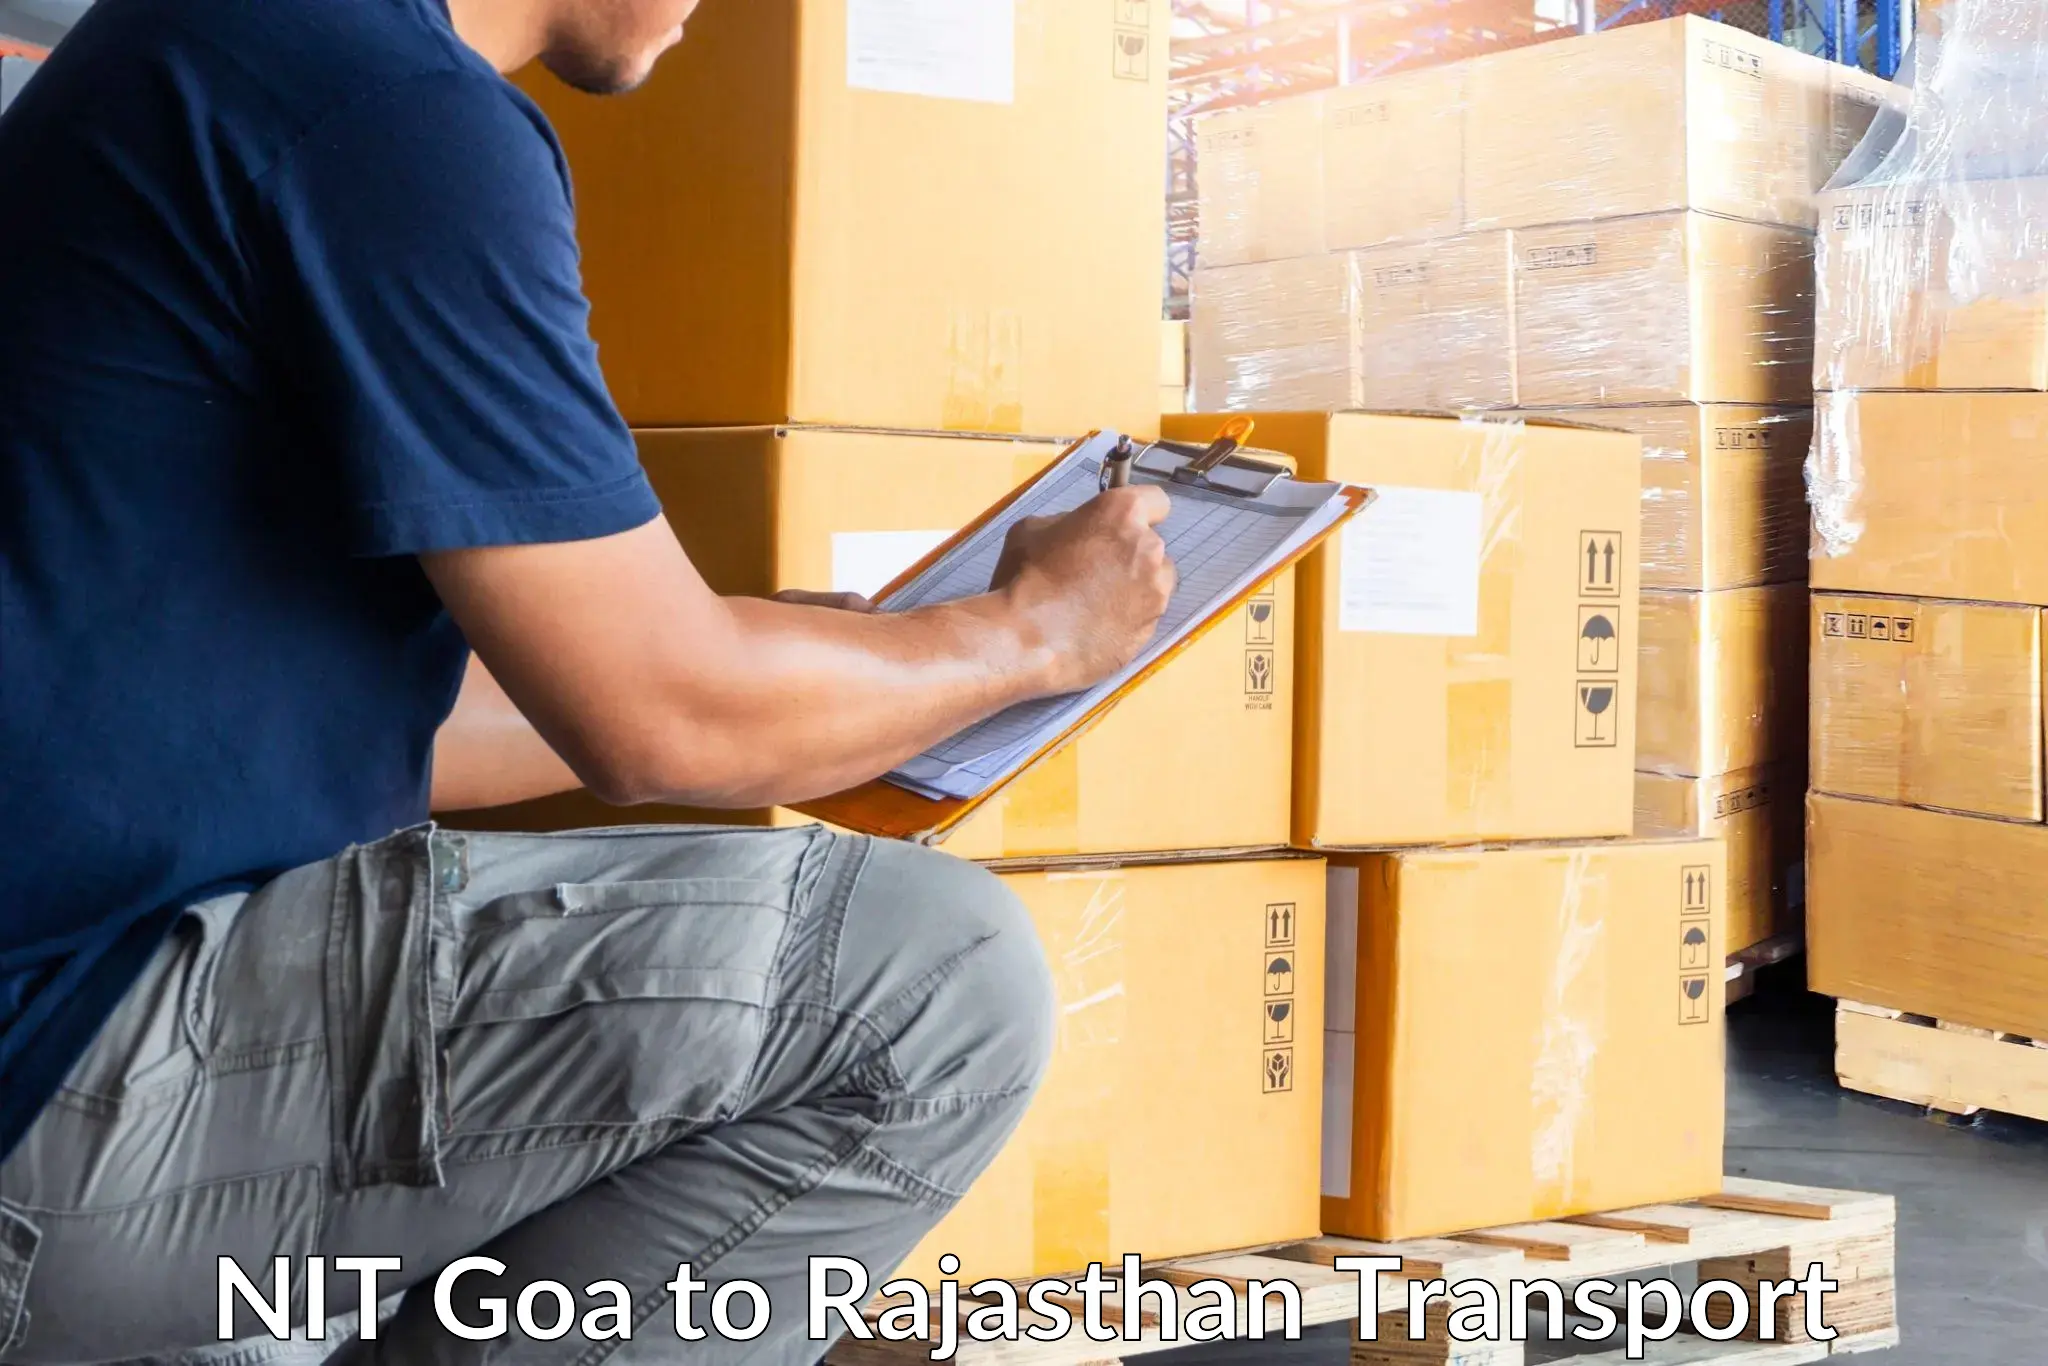 Commercial transport service NIT Goa to Suratgarh